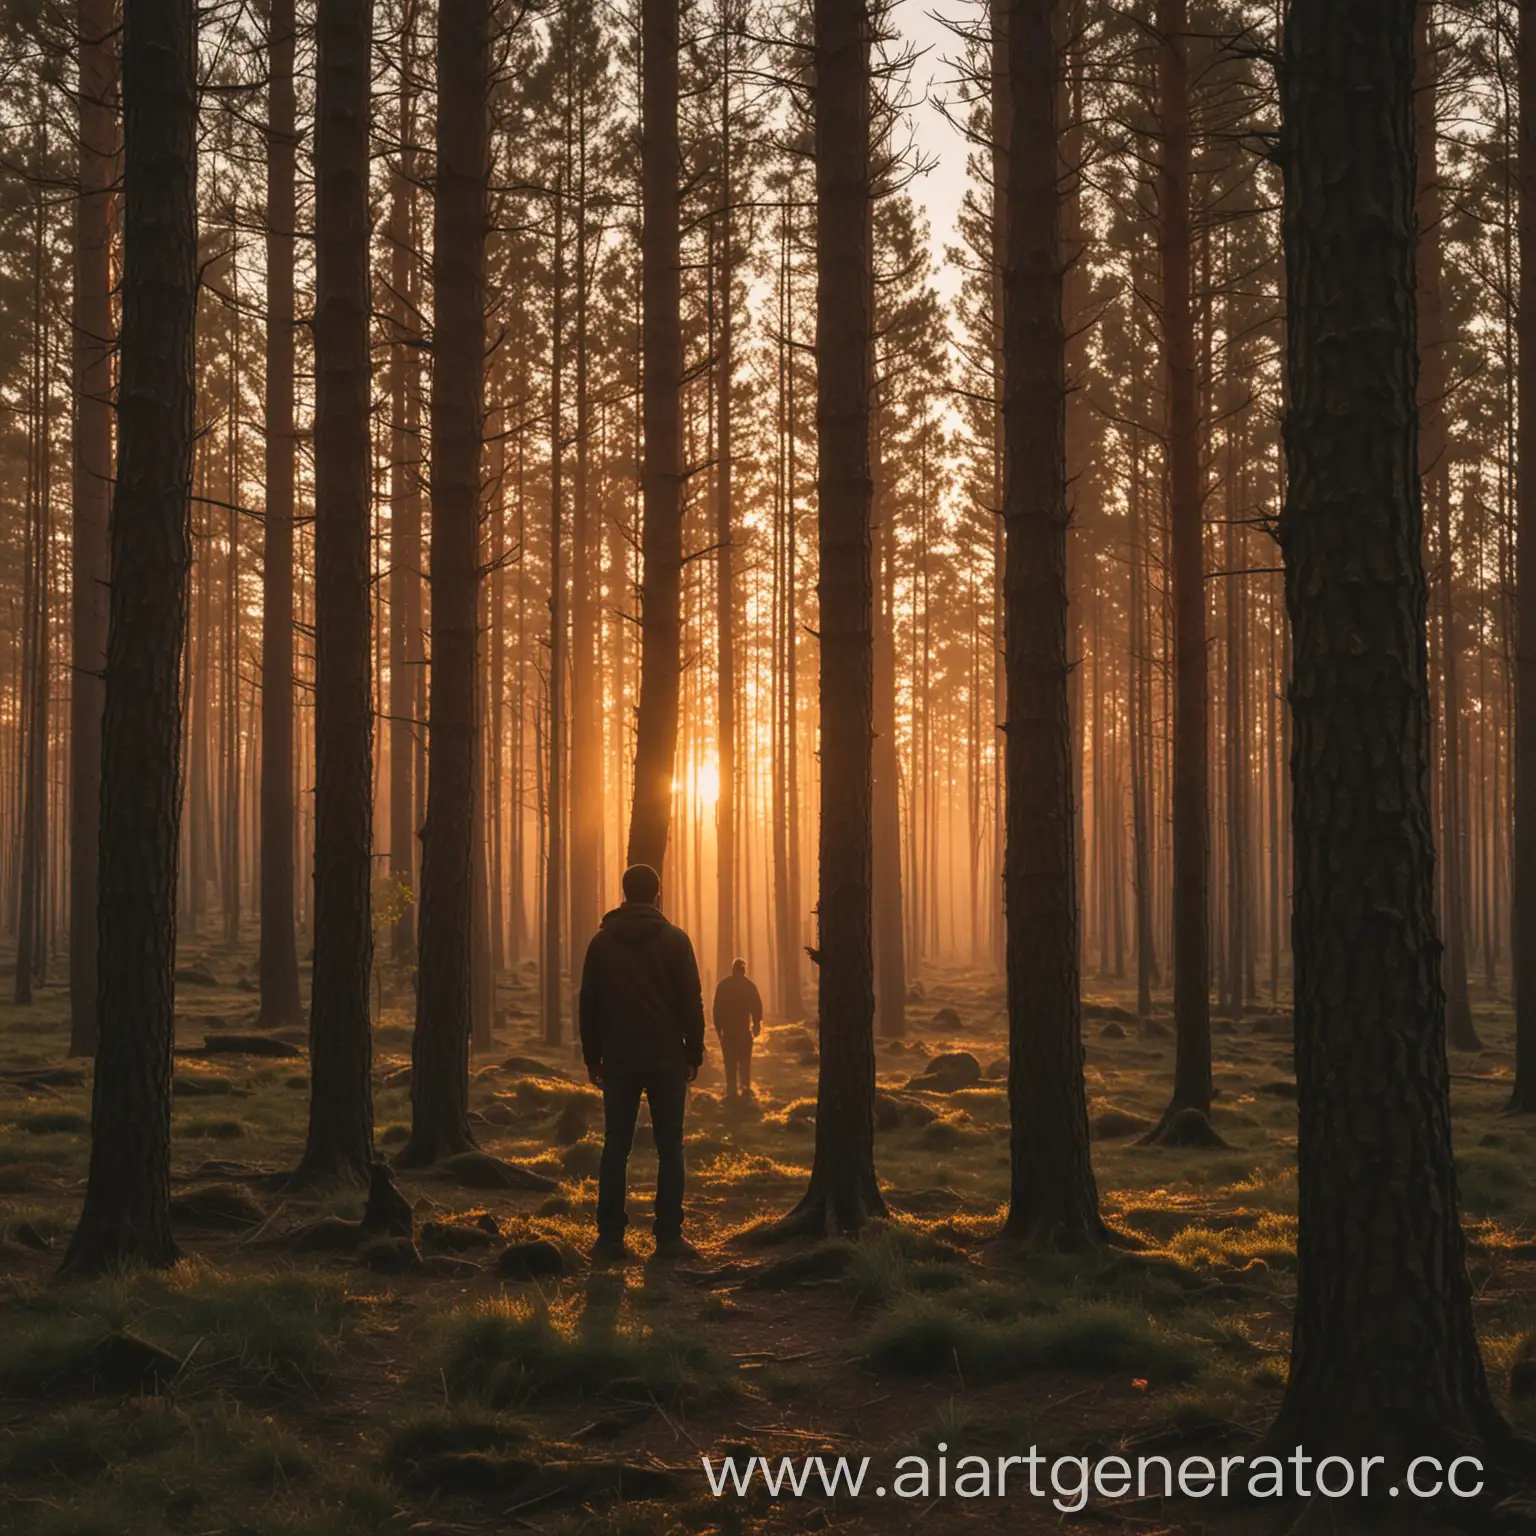 Silhouette-of-a-Man-Standing-in-Pine-Forest-at-Sunset